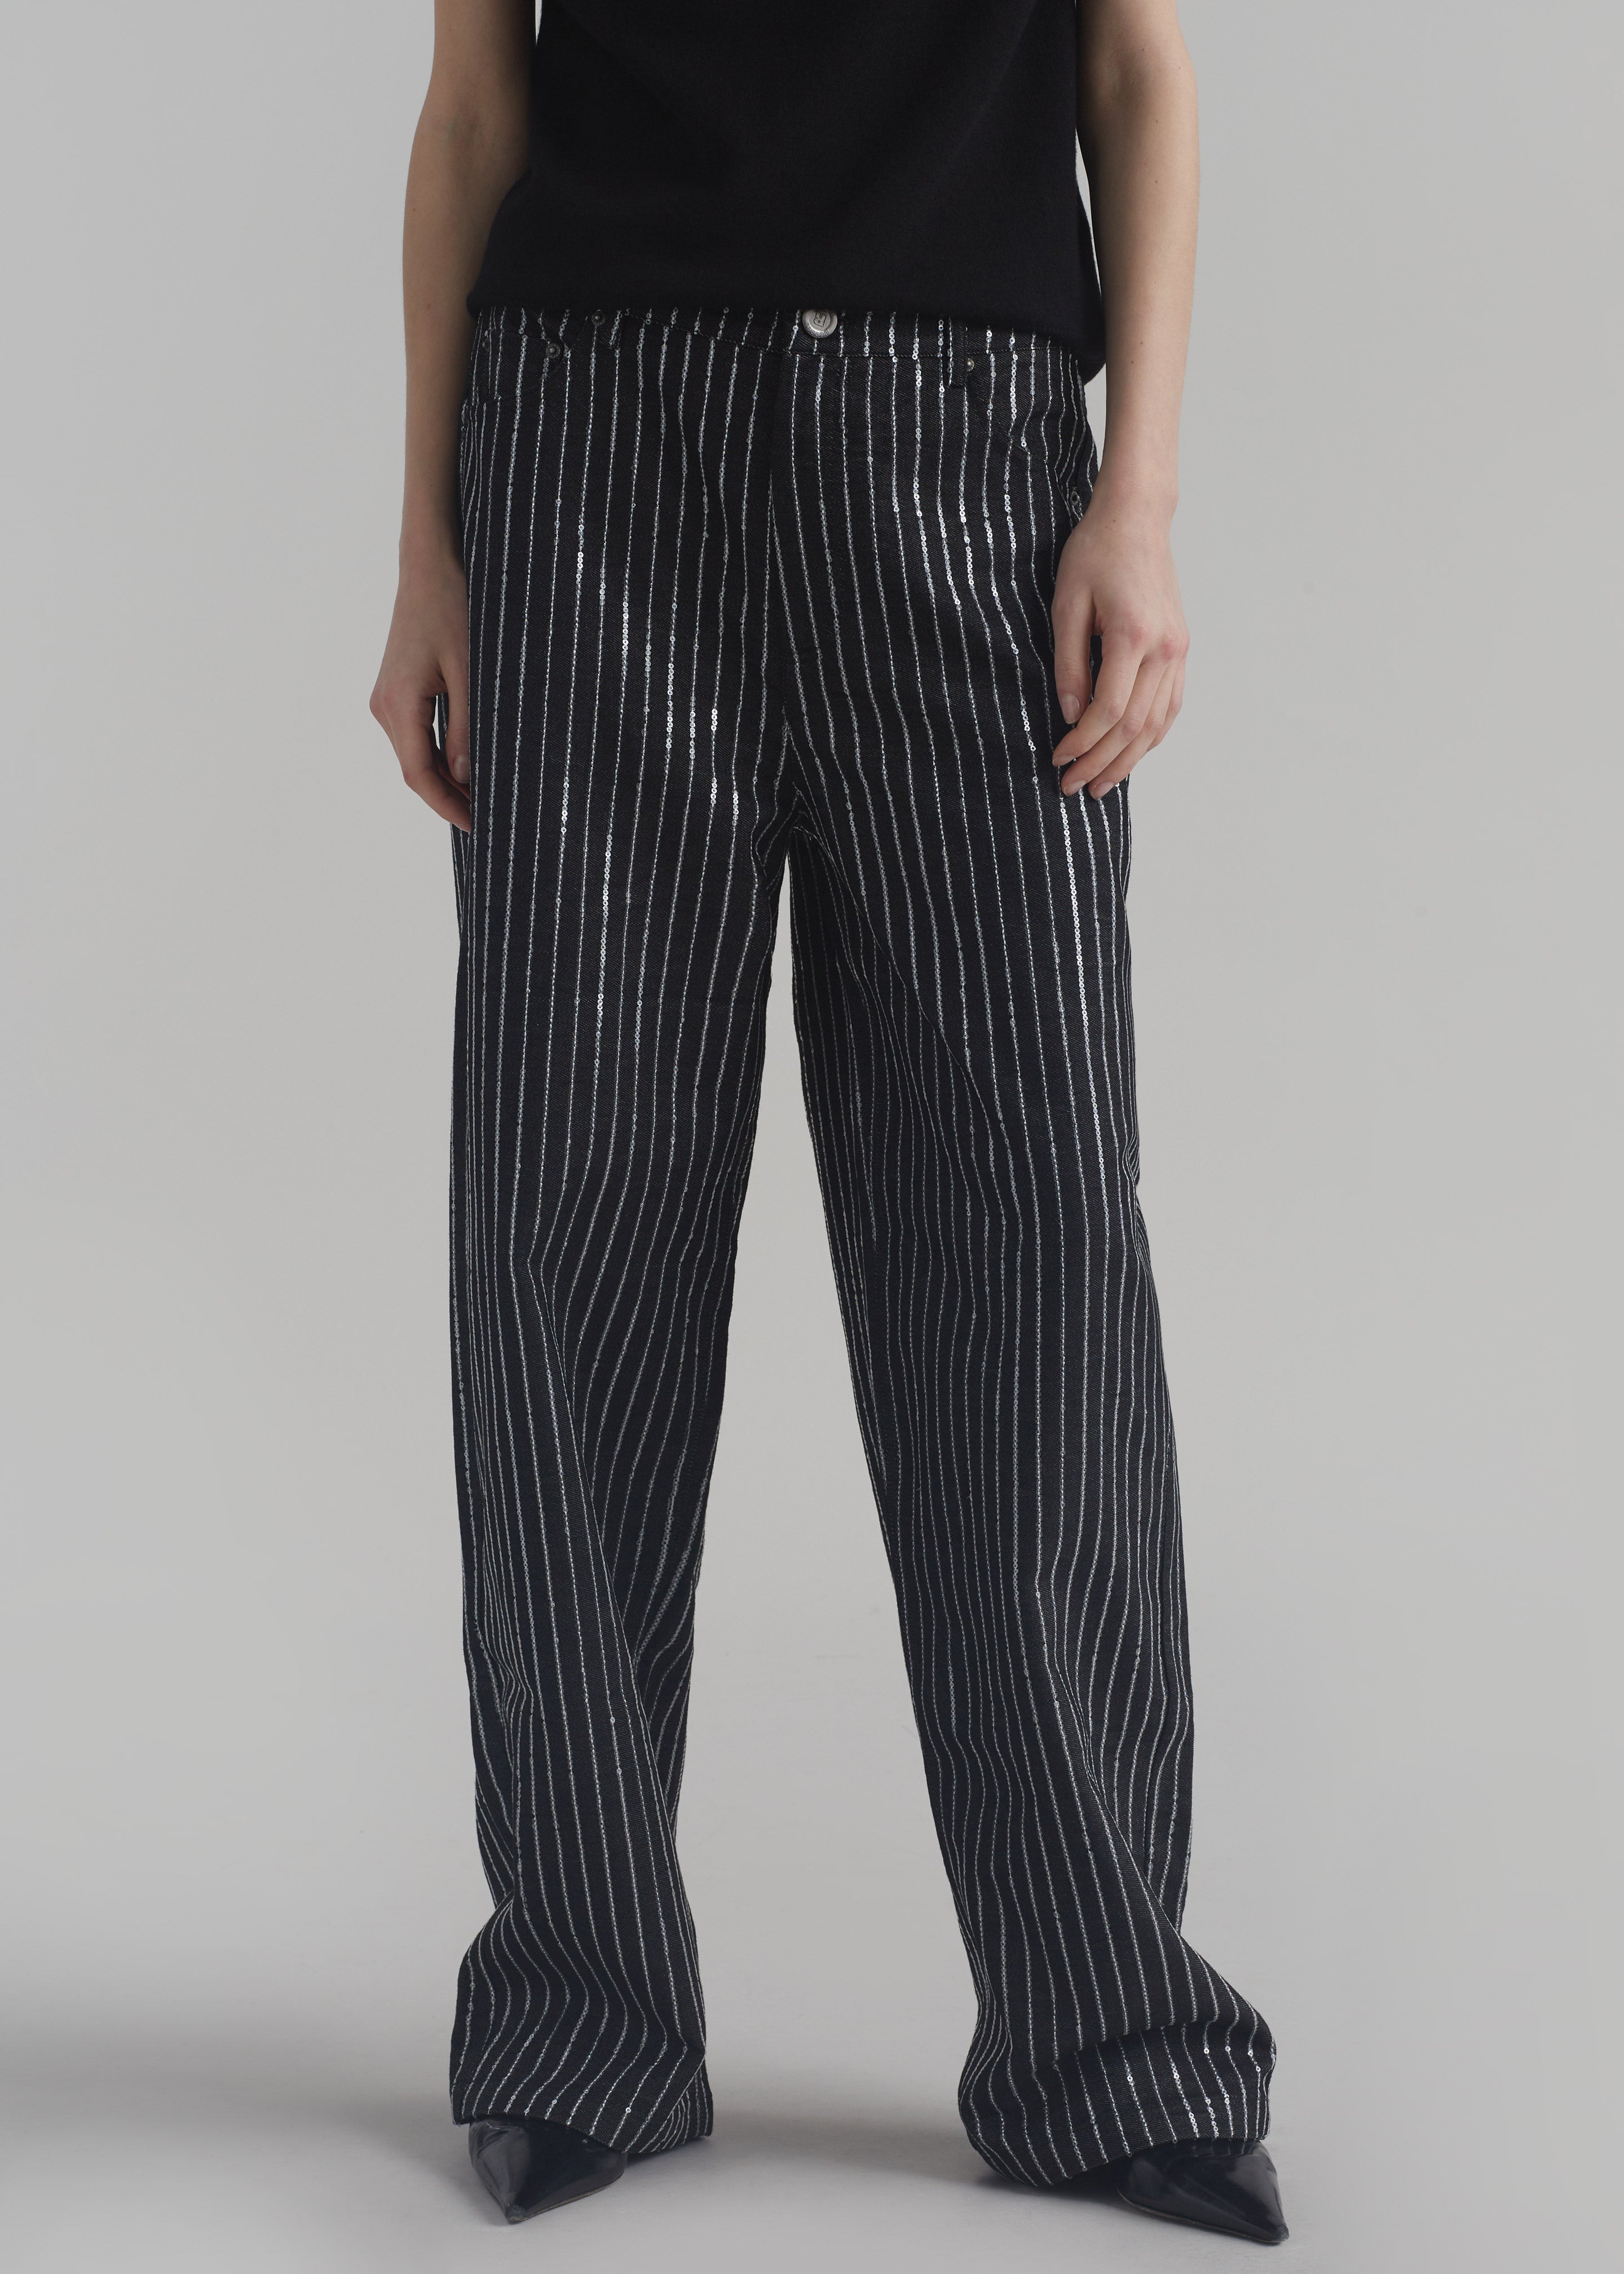 Rotate Sequin Twill Wide Pants - Black - 5